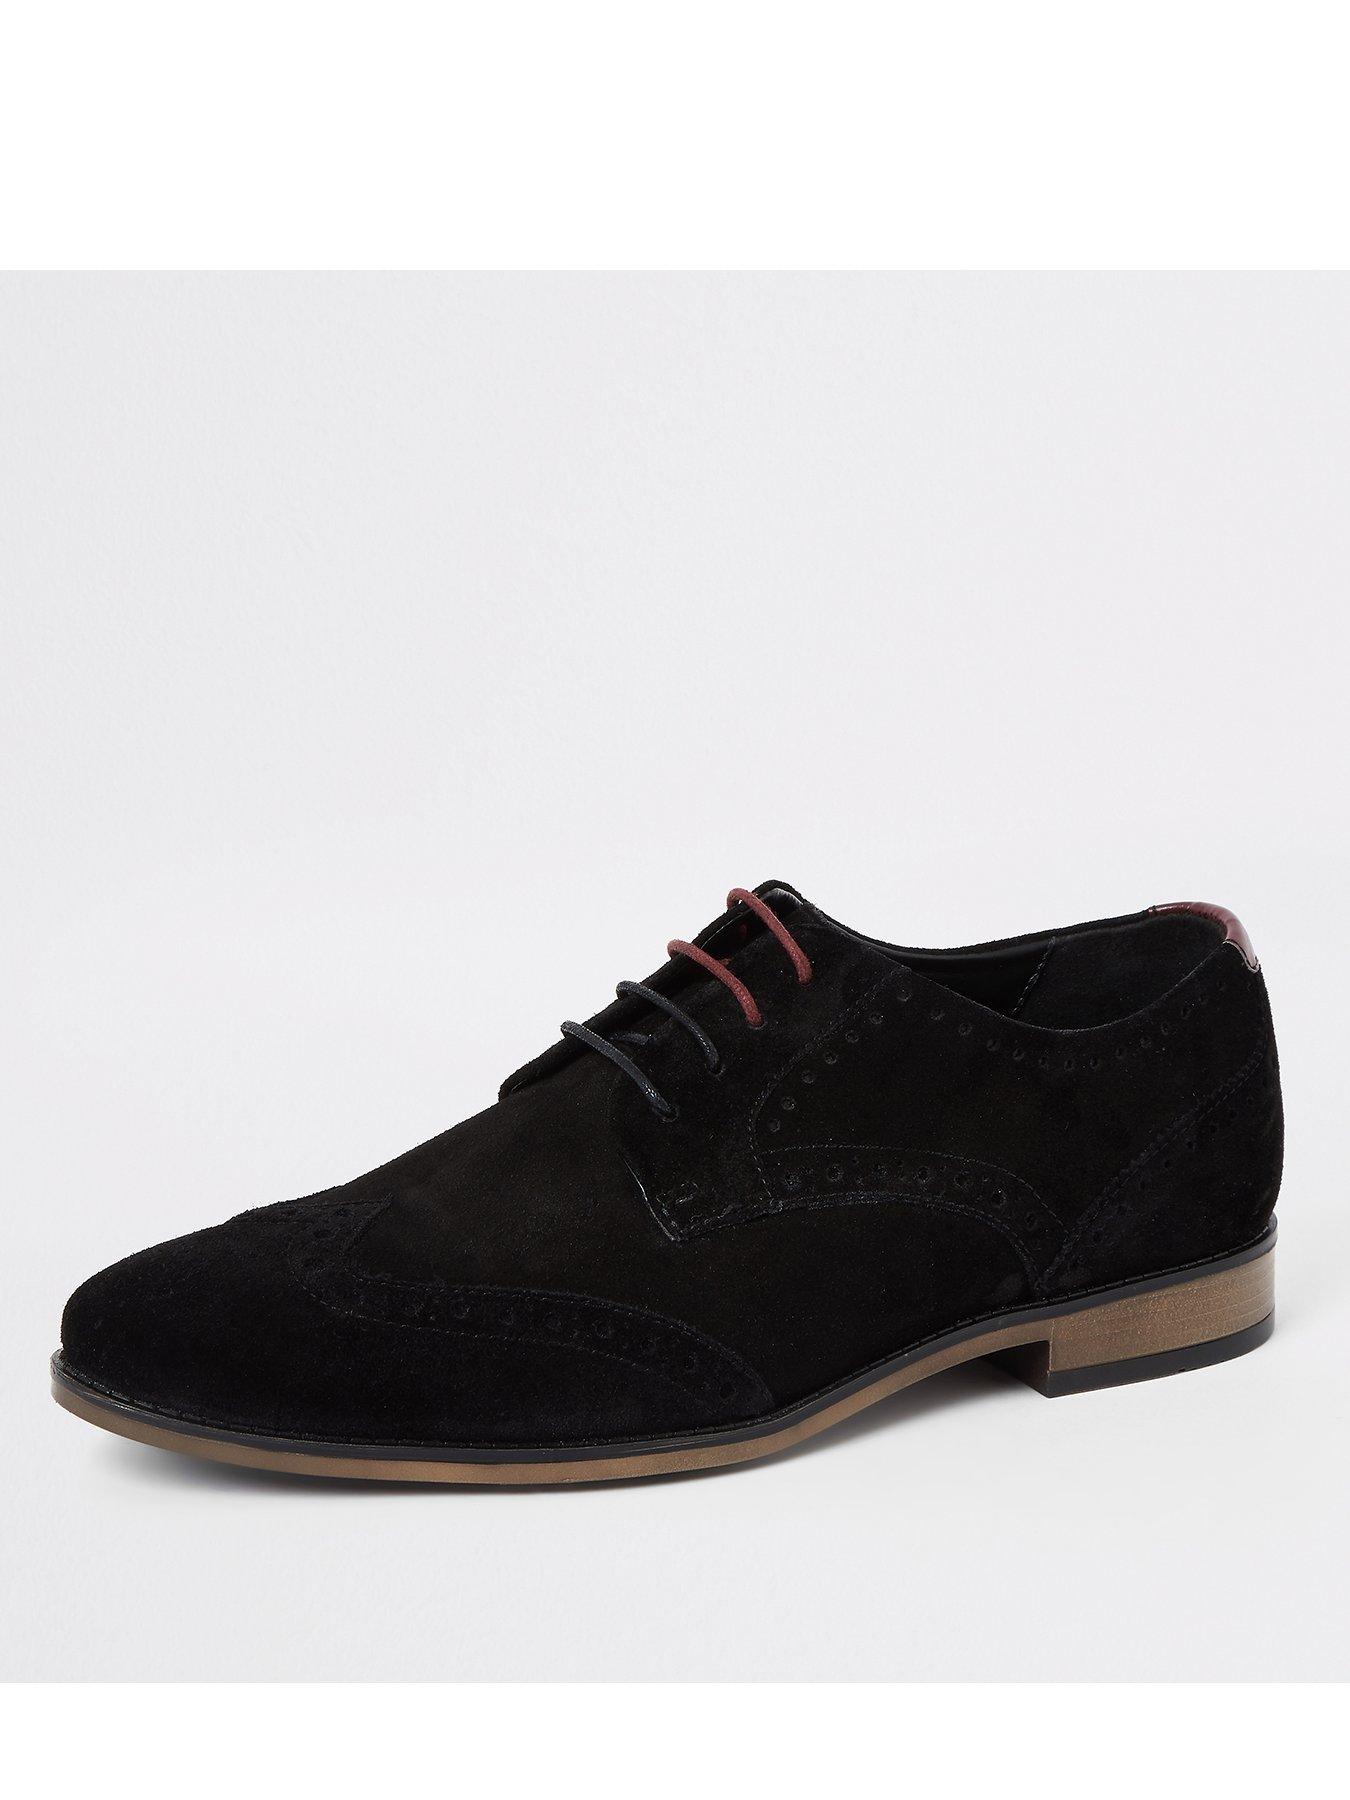 nyx formal shoes